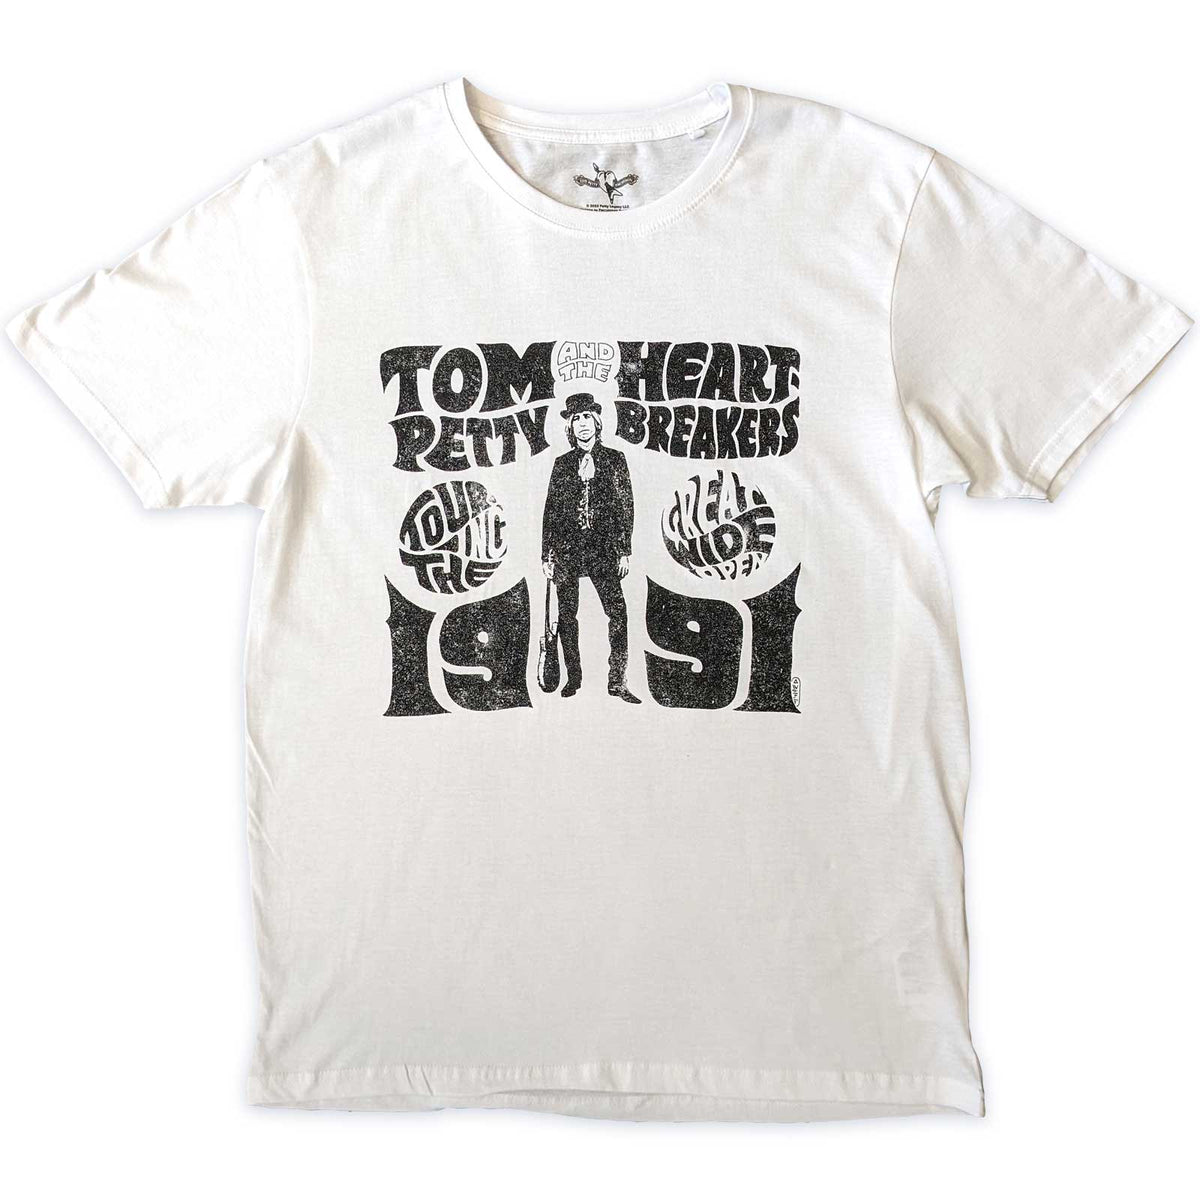 Tom Petty & the Heartbreakers Unisex T-Shirt - Great Wide Open - Official Product